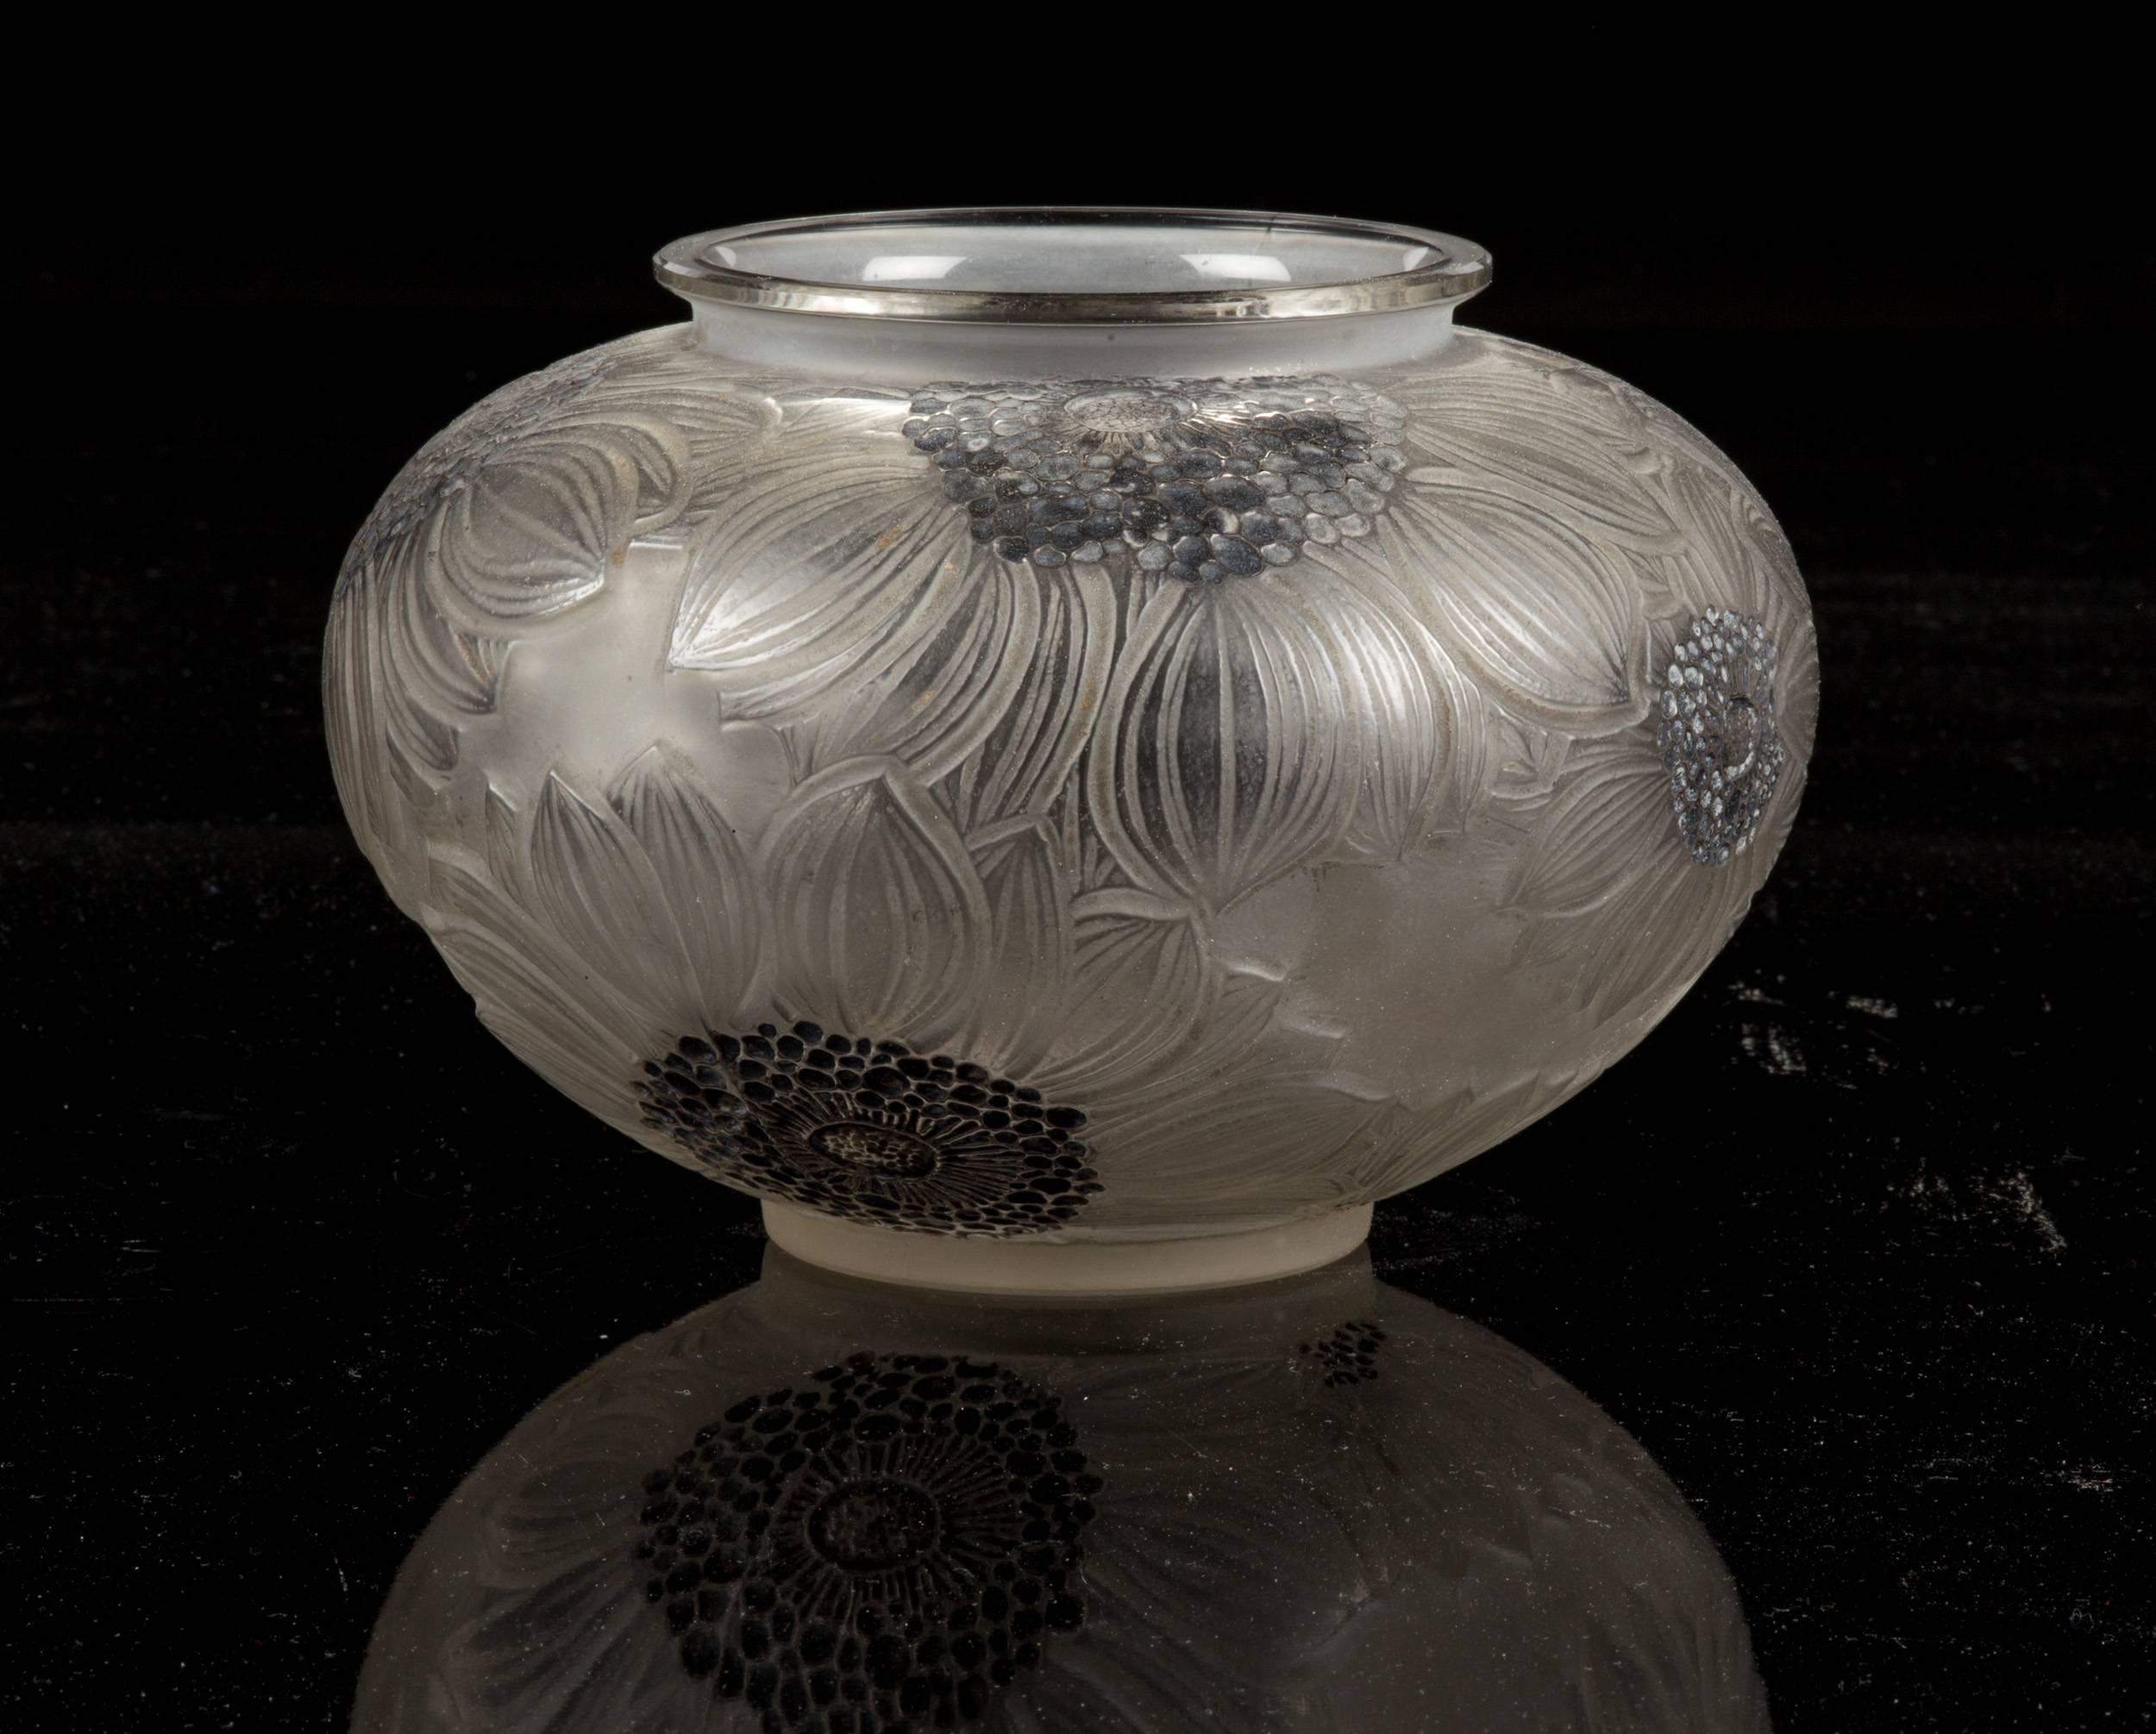 René Lalique vase dahlias.
Frosted and enameled large flower heads decorated glass.
Signed in the mold,
'Dahlias', design 1923.
Frosted glass, and black enamel.
Model created in 1923.
Measures: 12.5 cm high by 17.5 cm.
Moulded 'R.